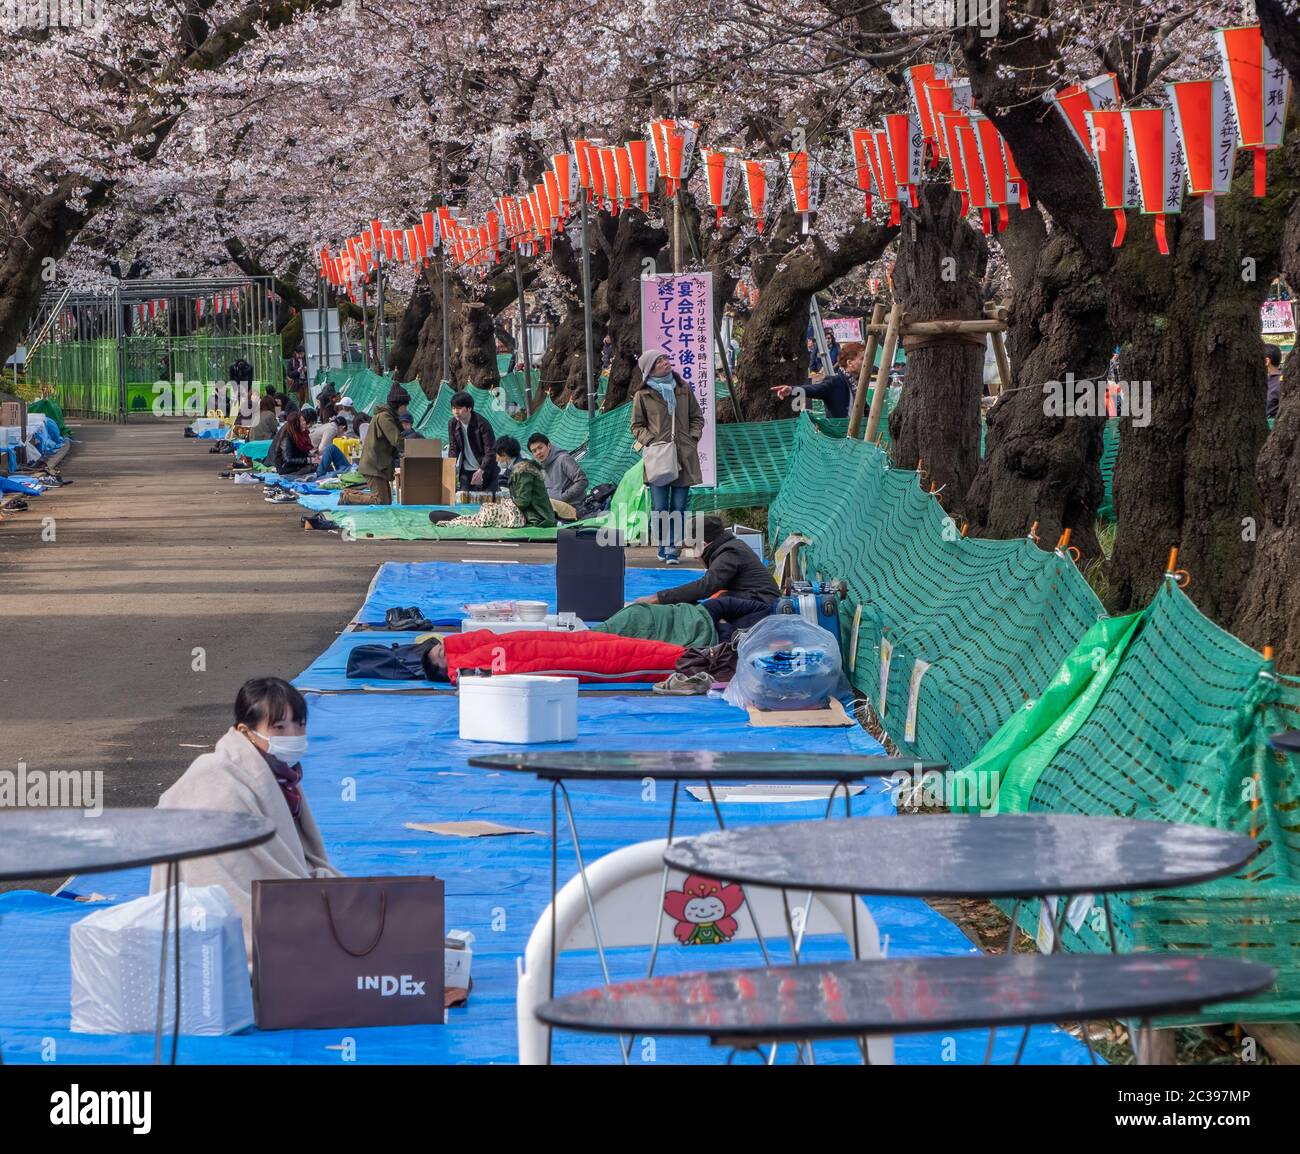 Japanese having cherry blossom viewing outdoor party picnic or hanami in Ueno Park, Tokyo, Japan. Stock Photo